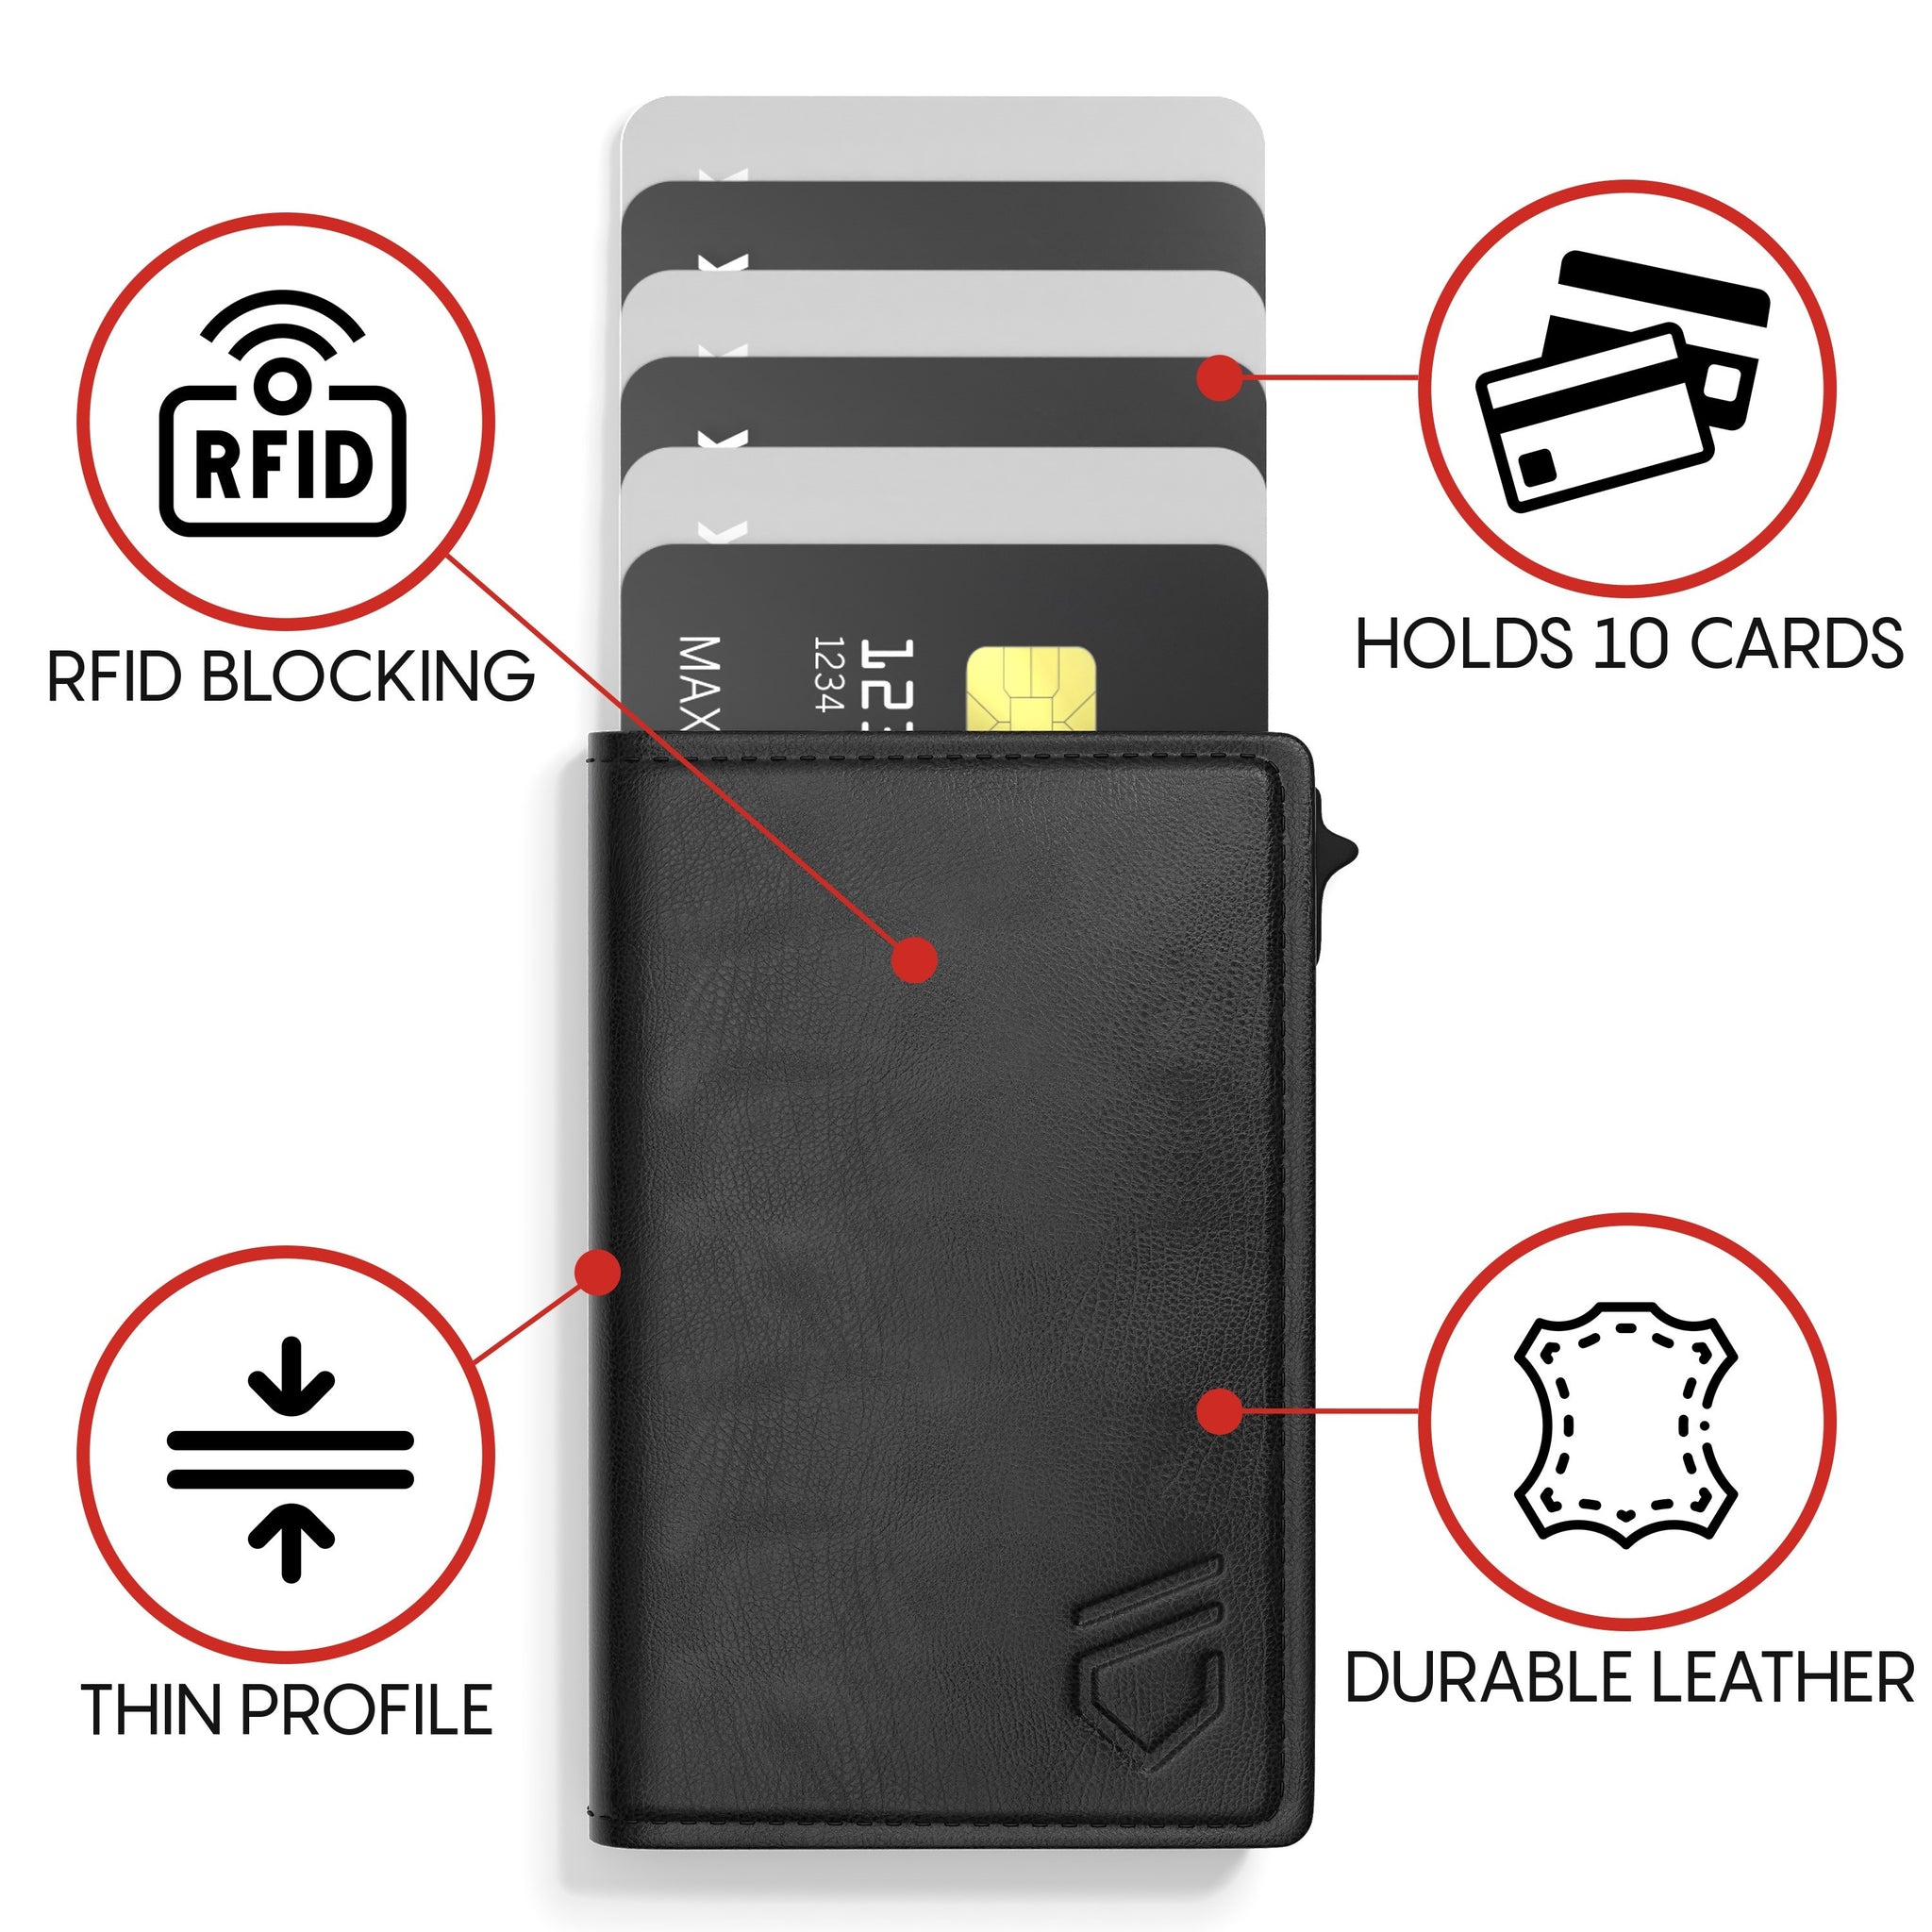 The Bolt - Automatic Wallet | RFID Blocking Automatic Popup Wallet - FOSH